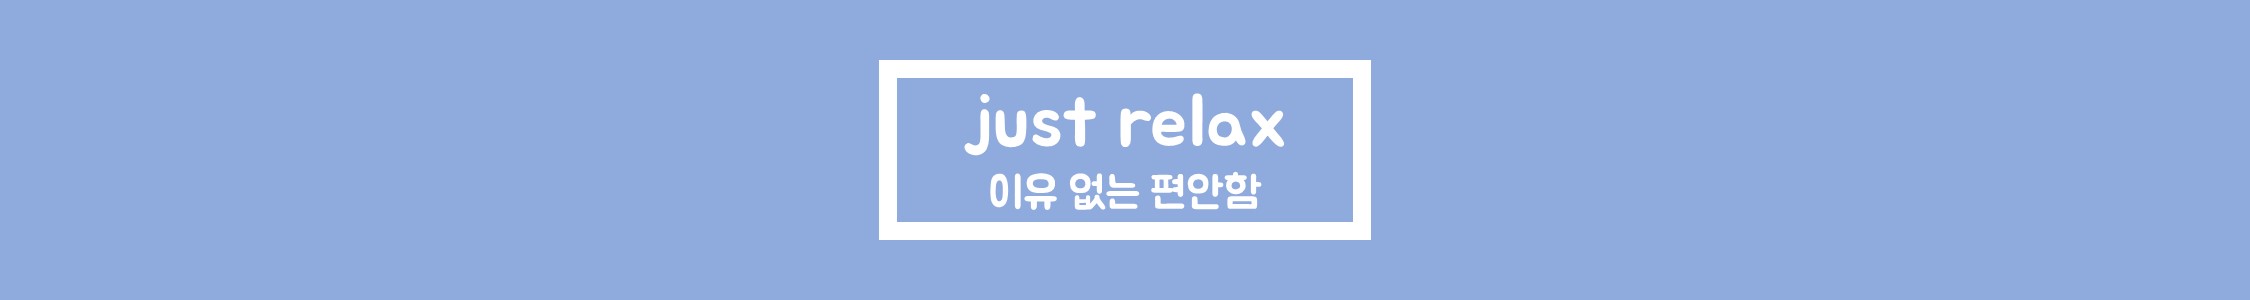   ( Just relax ) ̿/޽///ڱ